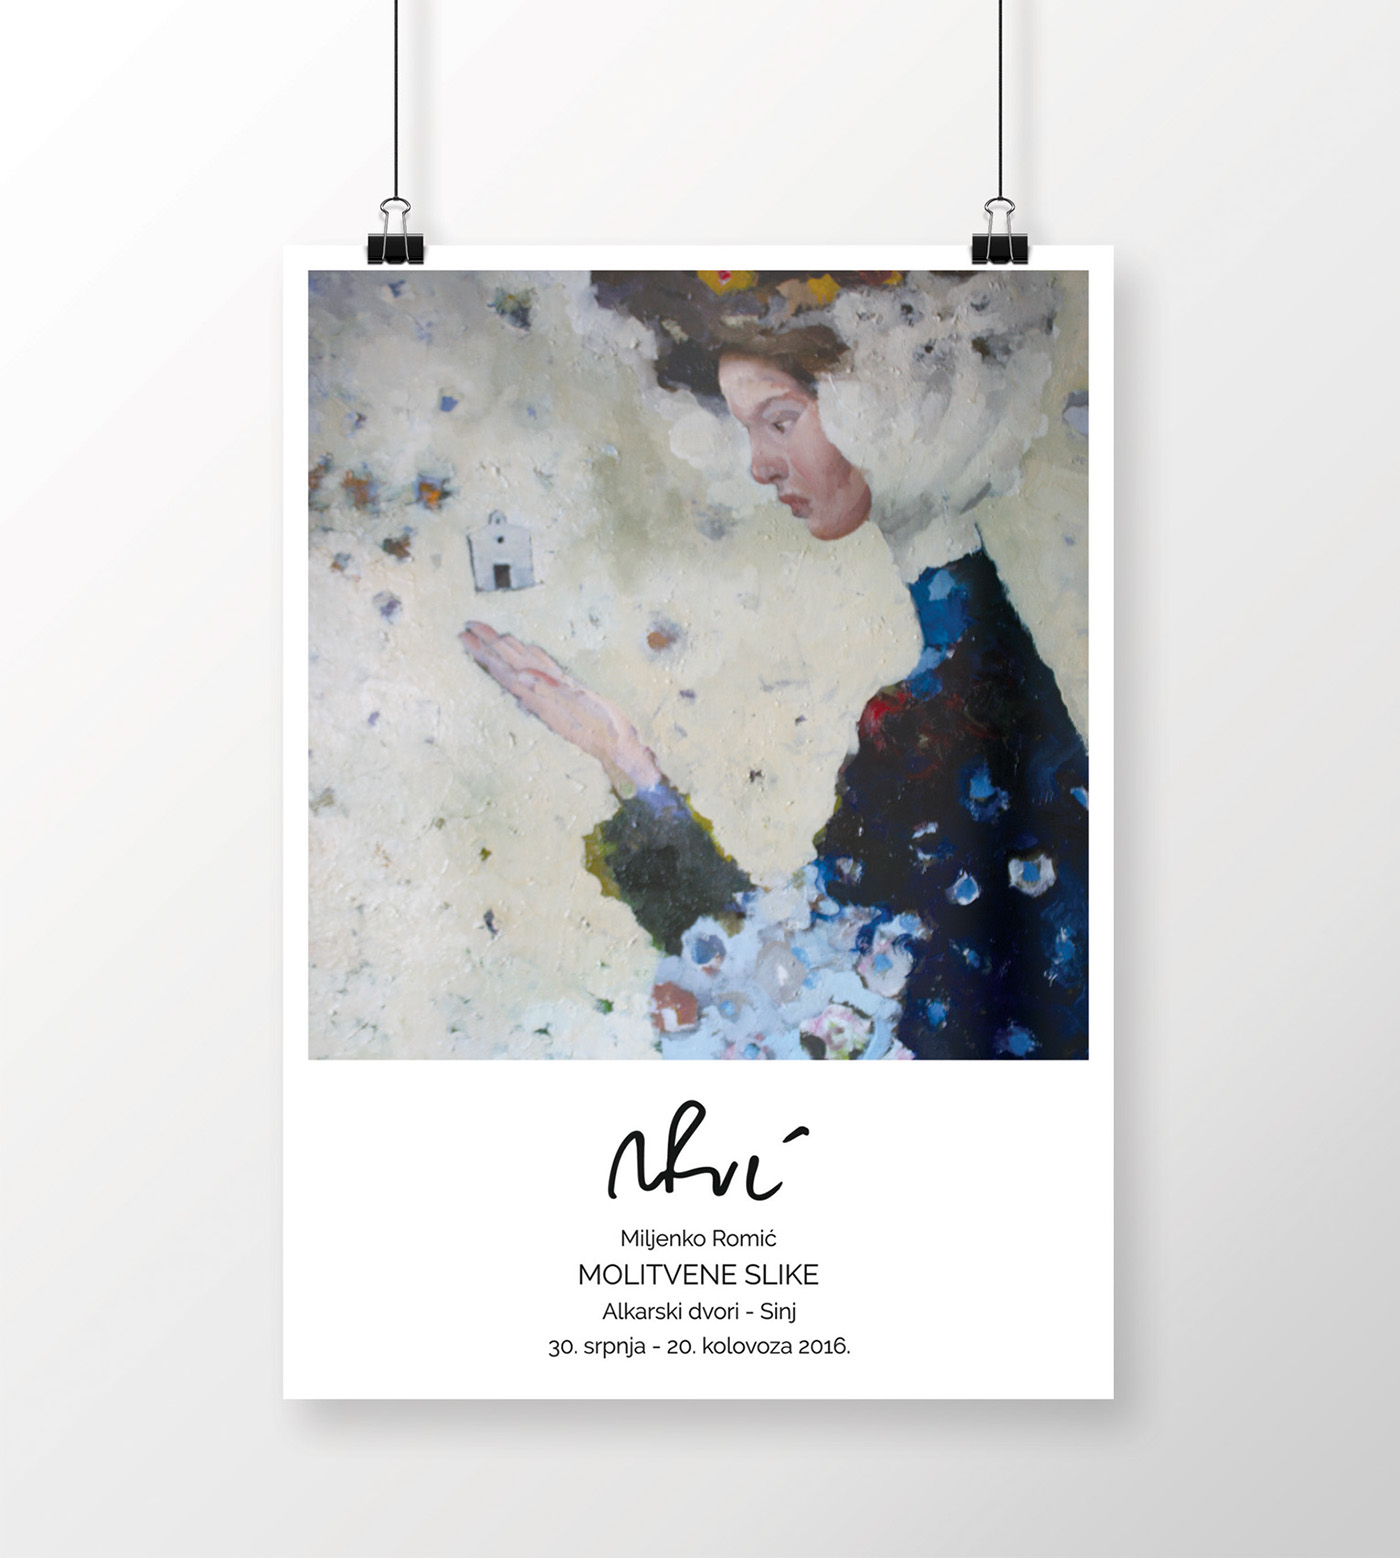 visual identity Exhibition  business card Poster Design poster graphic design  Paintings art Exhibition Design 